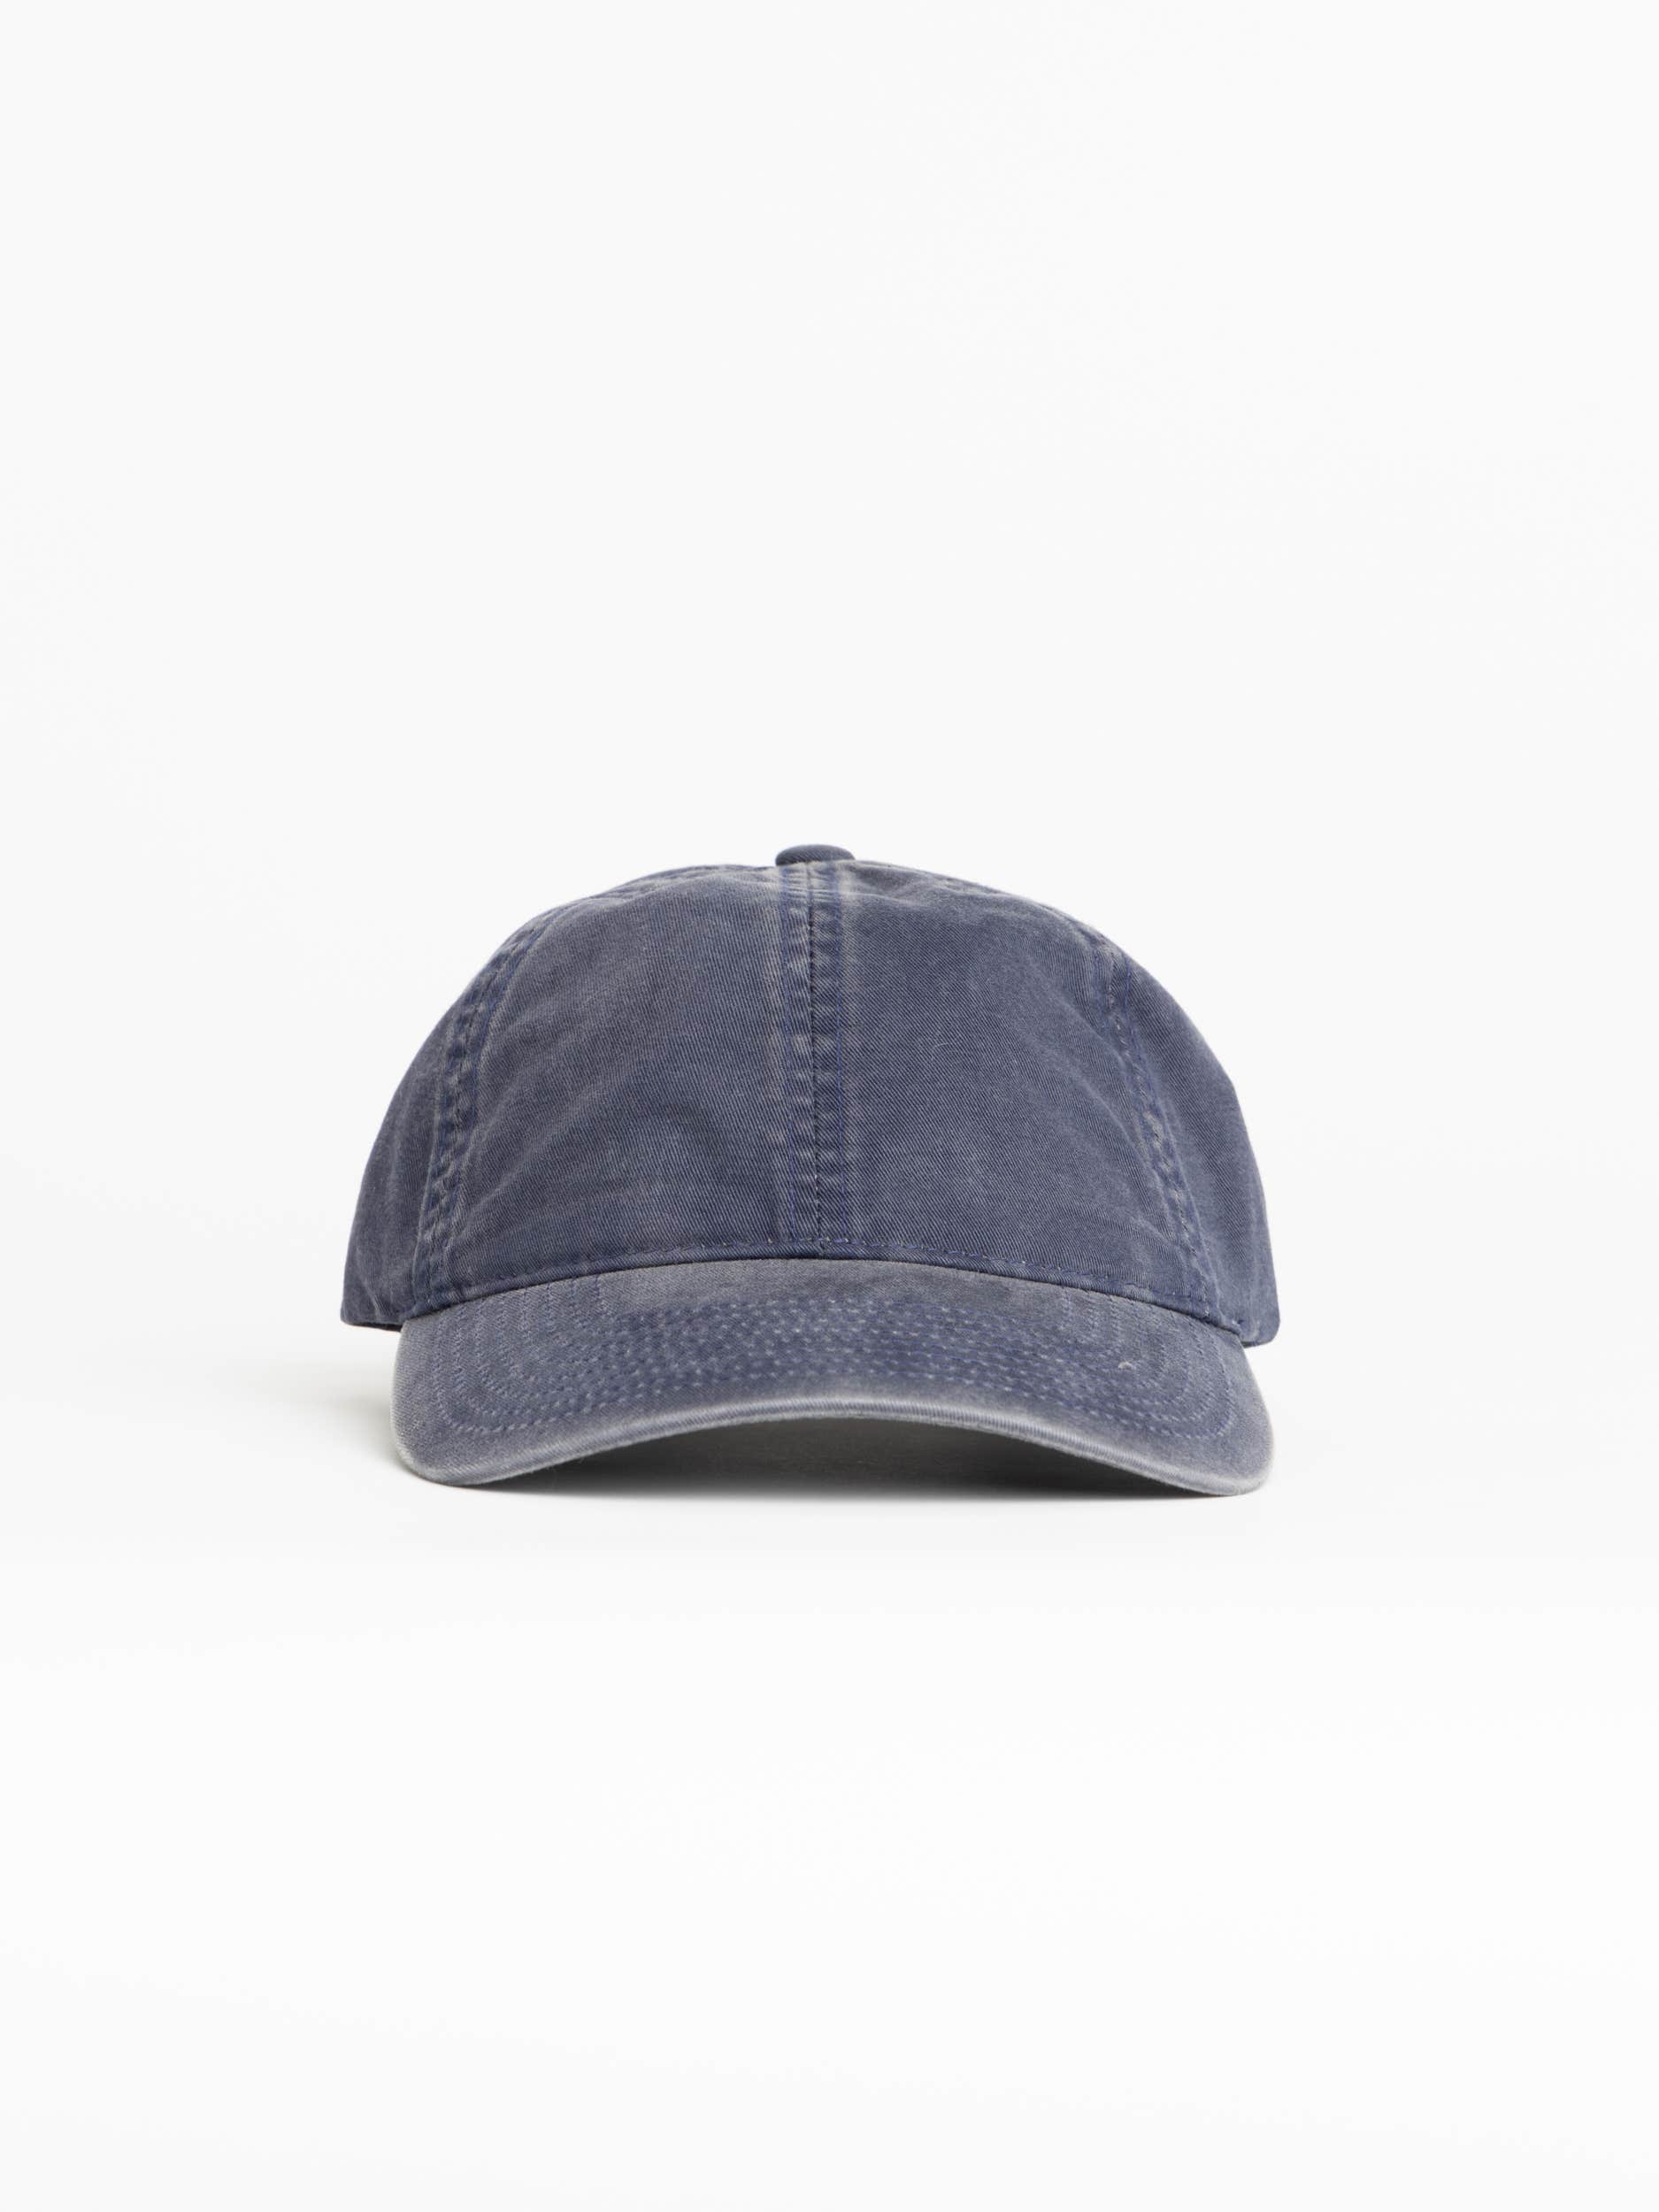 Blue Washed Cotton Ball Cap